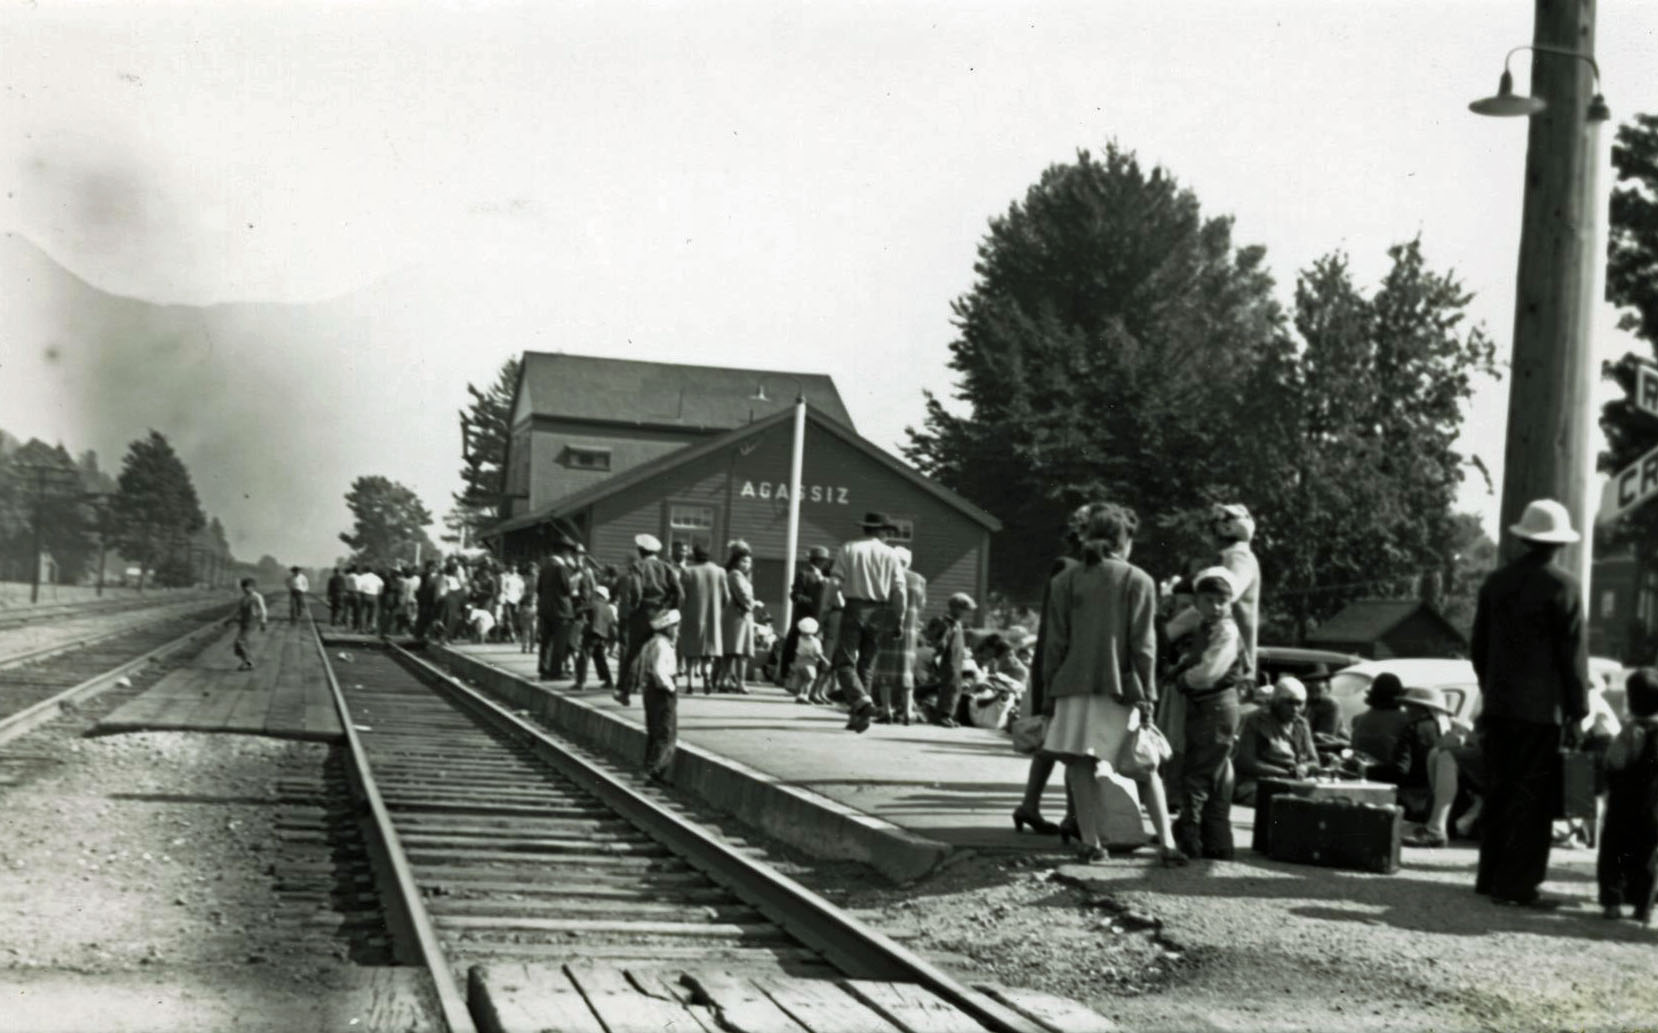 Black and white photograph of a crowd of people on the Agassiz train station platform.